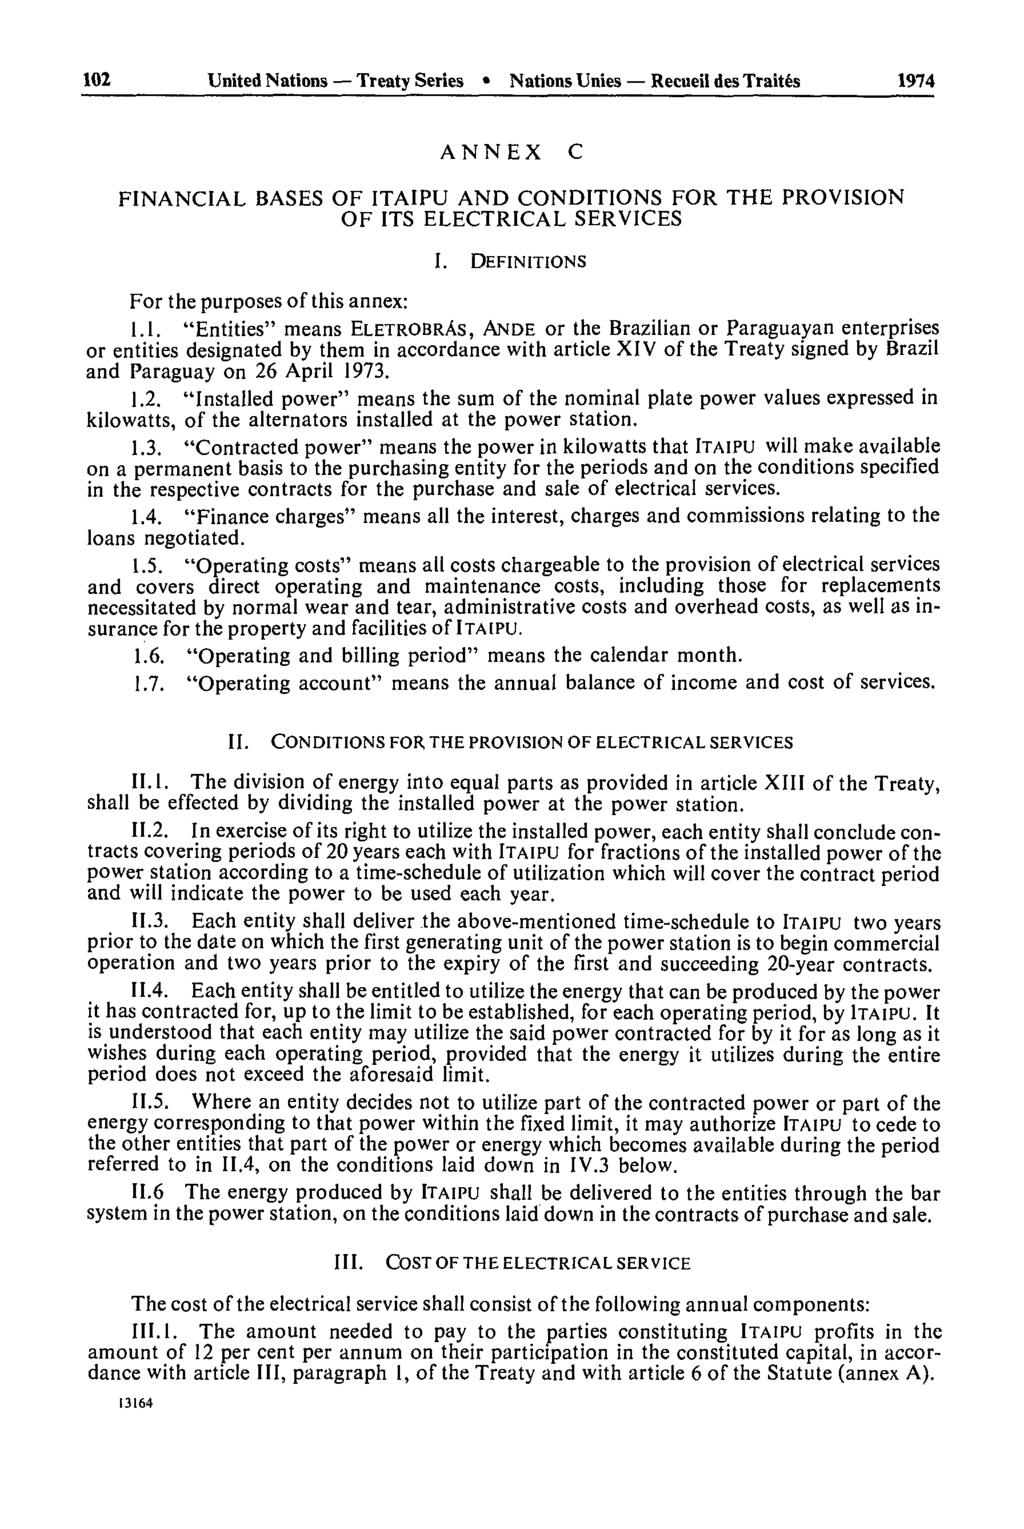 102 United Nations Treaty Series Nations Unies Recueil des Traités 1974 ANNEX C FINANCIAL BASES OF ITAIPU AND CONDITIONS FOR THE PROVISION OF ITS ELECTRICAL SERVICES I.